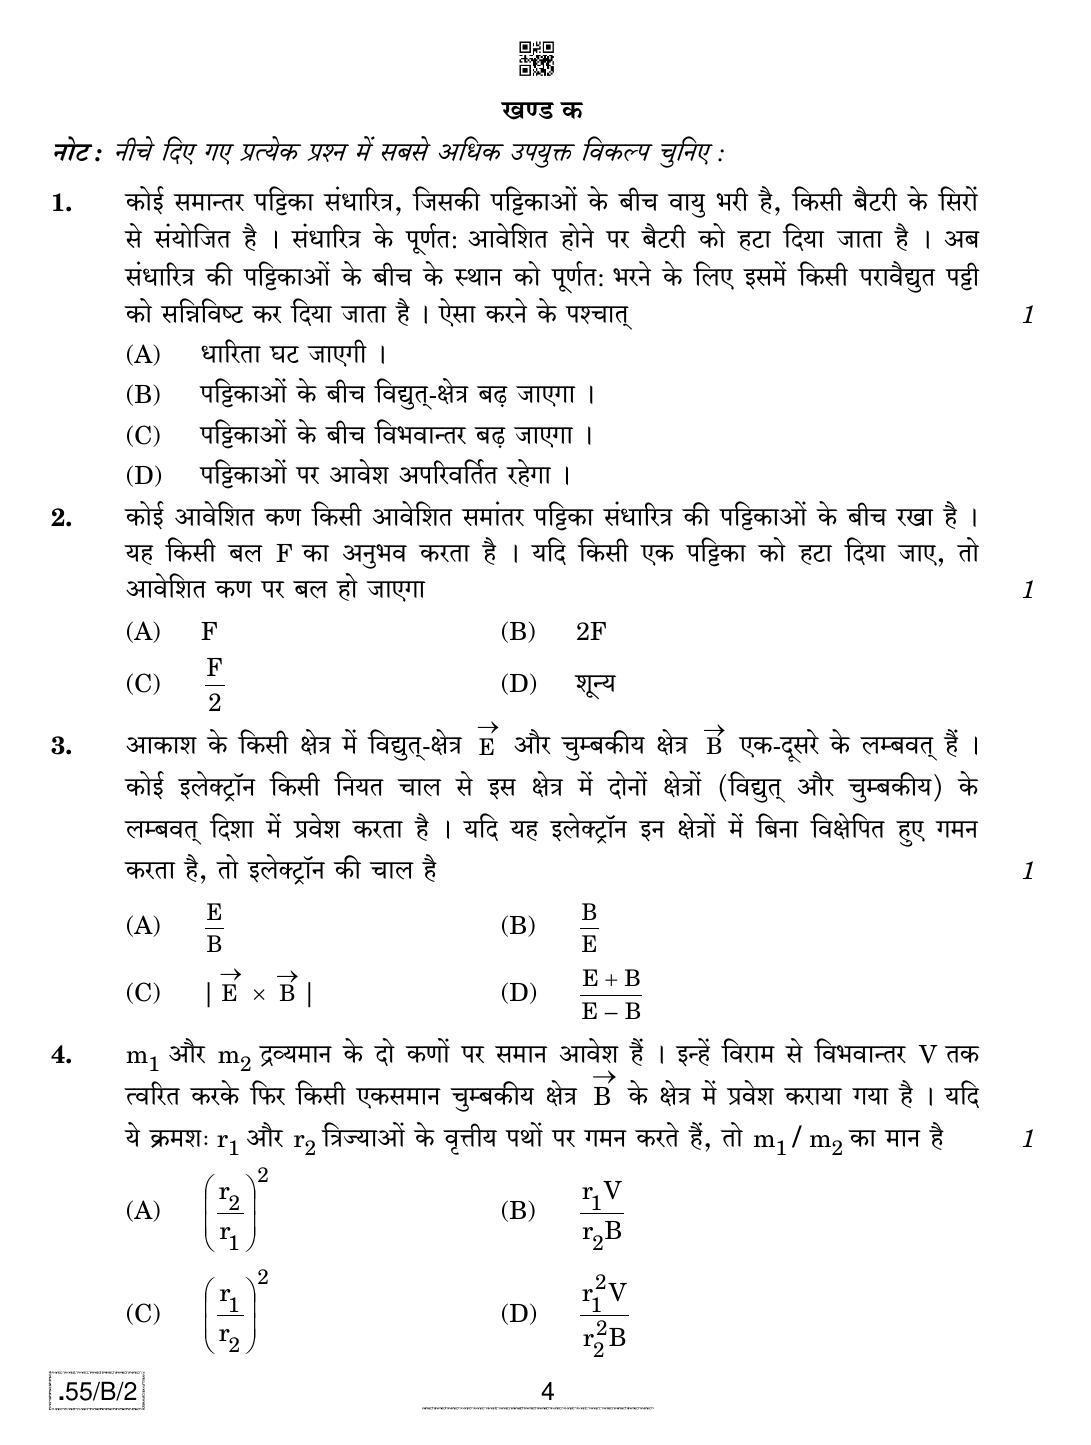 CBSE Class 12 55-C-2 - Physics 2020 Compartment Question Paper - Page 4